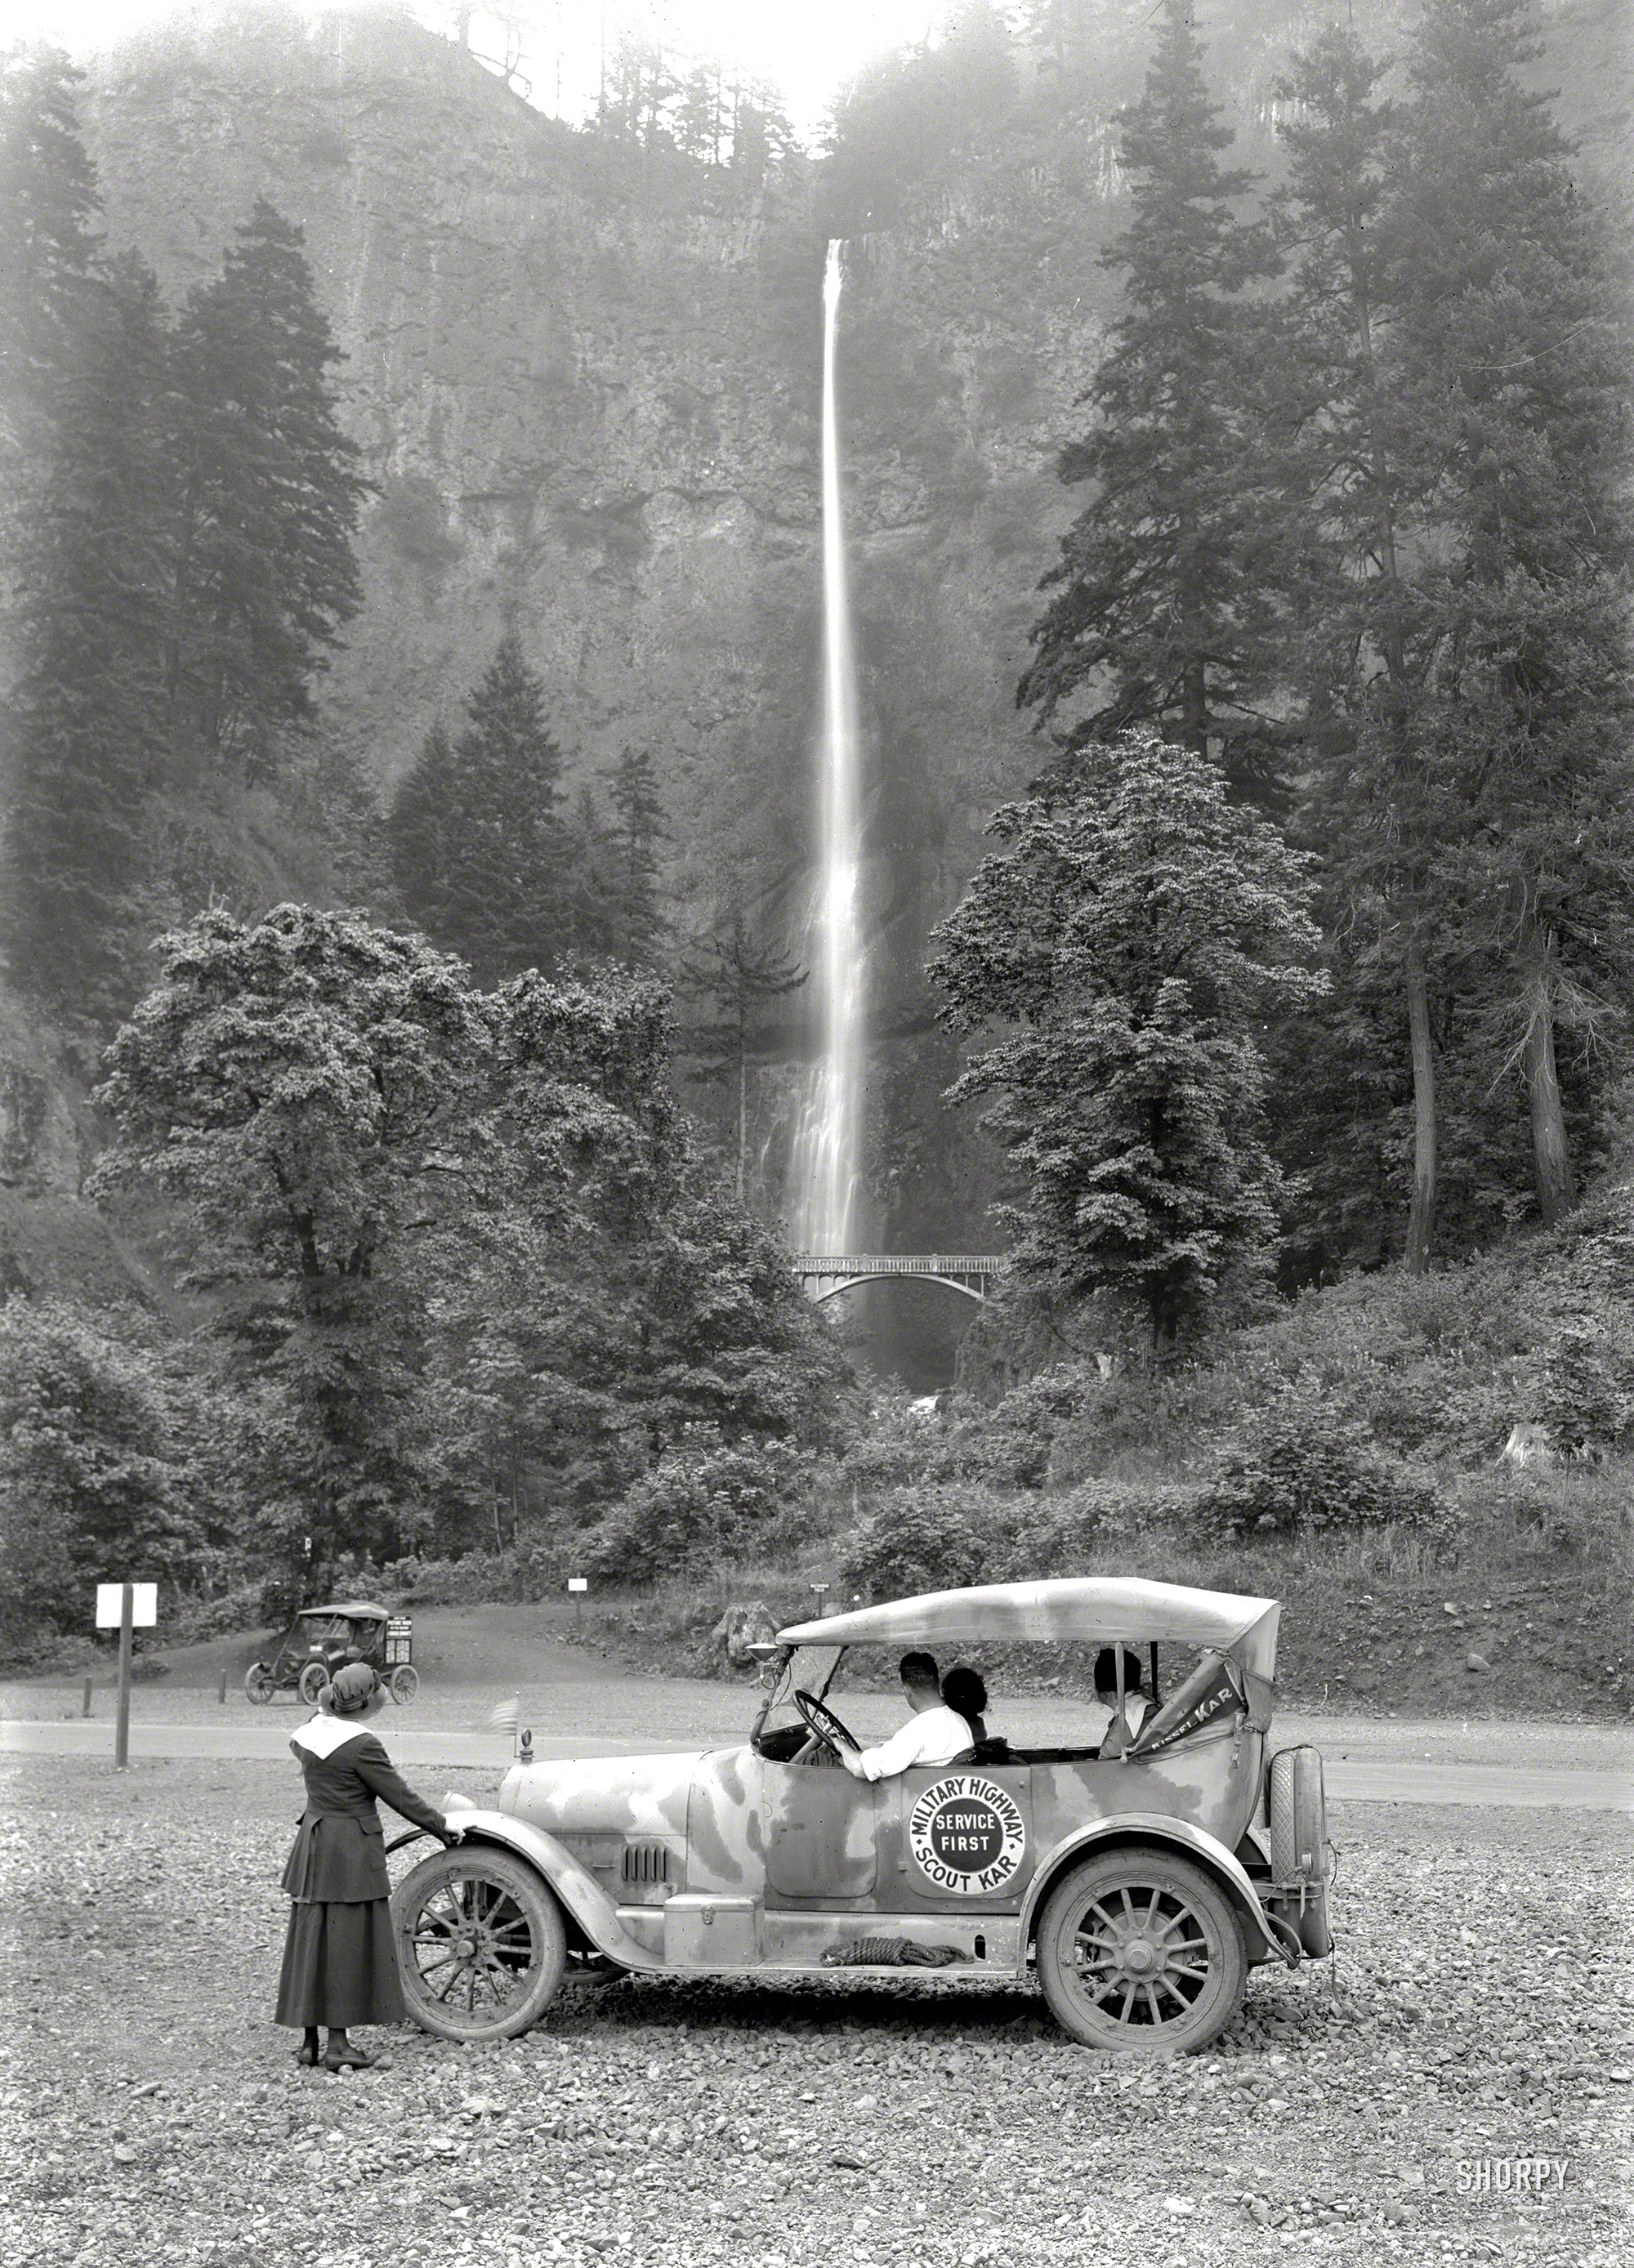 Multnomah Falls, Oregon, circa 1918. "Kissel military Highway Scout Kar." The camouflage-painted car last seen here and here patrolling the wilds of the Pacific Northwest. 5x7 glass negative by Christopher Helin. View full size.